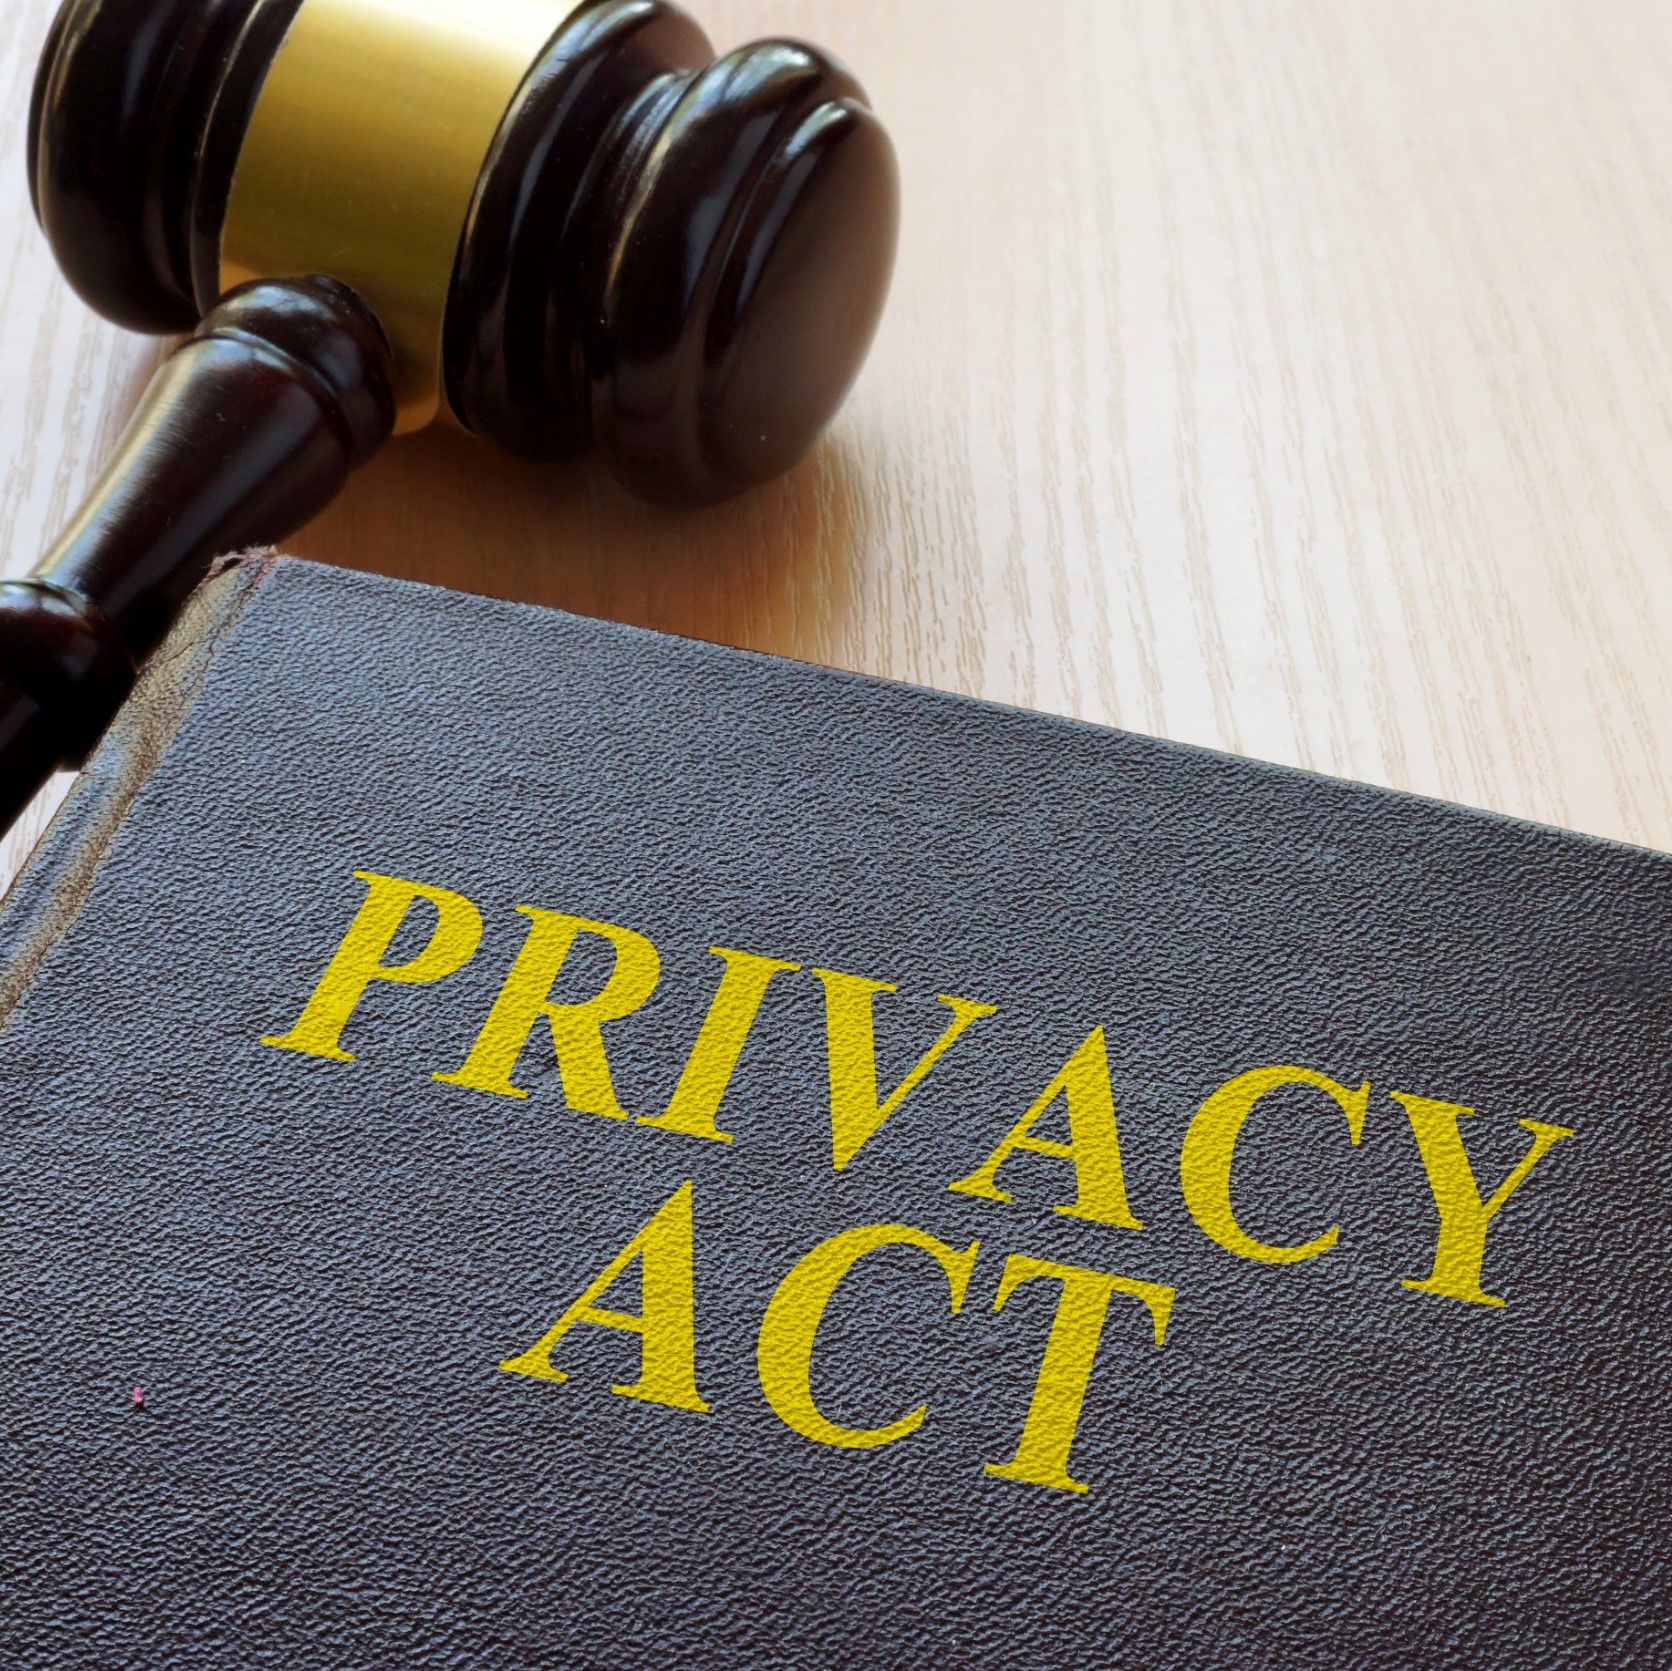 How the New American Data Privacy Act Will Affect Marketing Trade